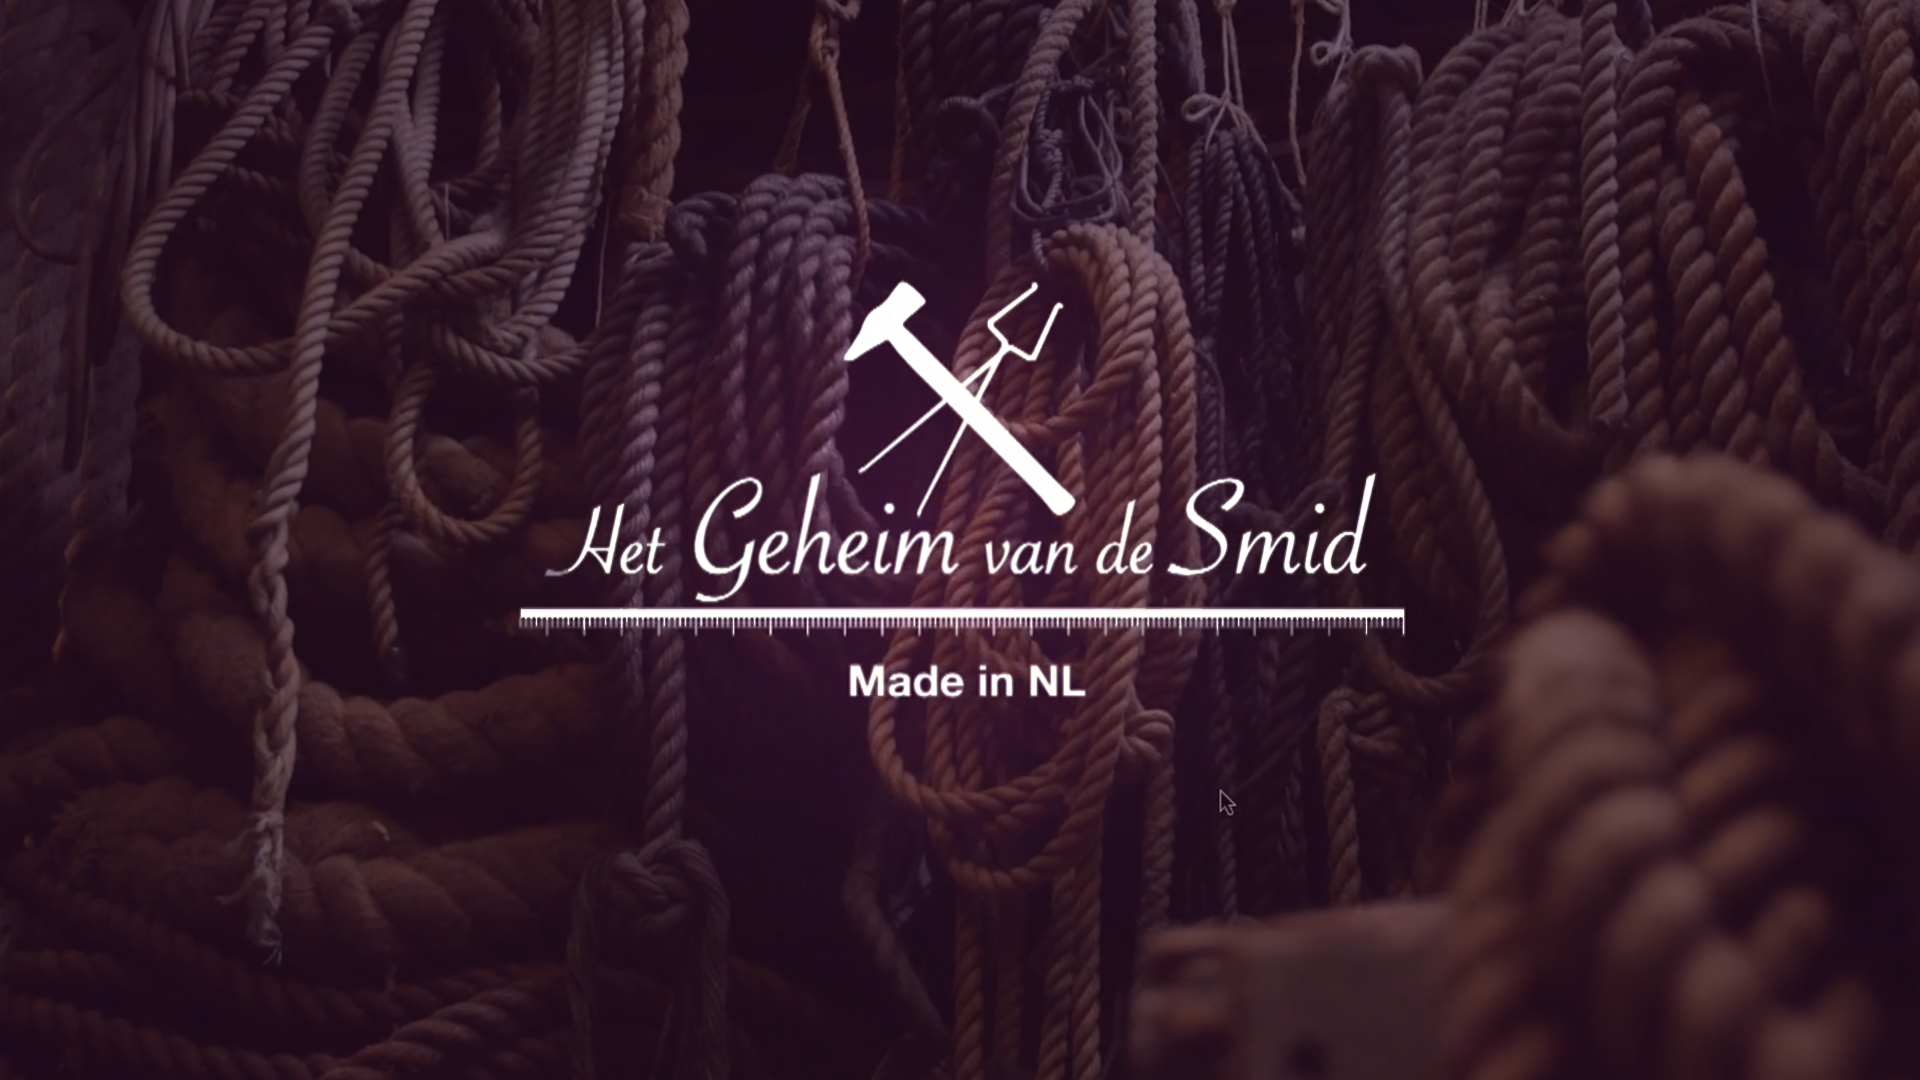 MADE IN NL